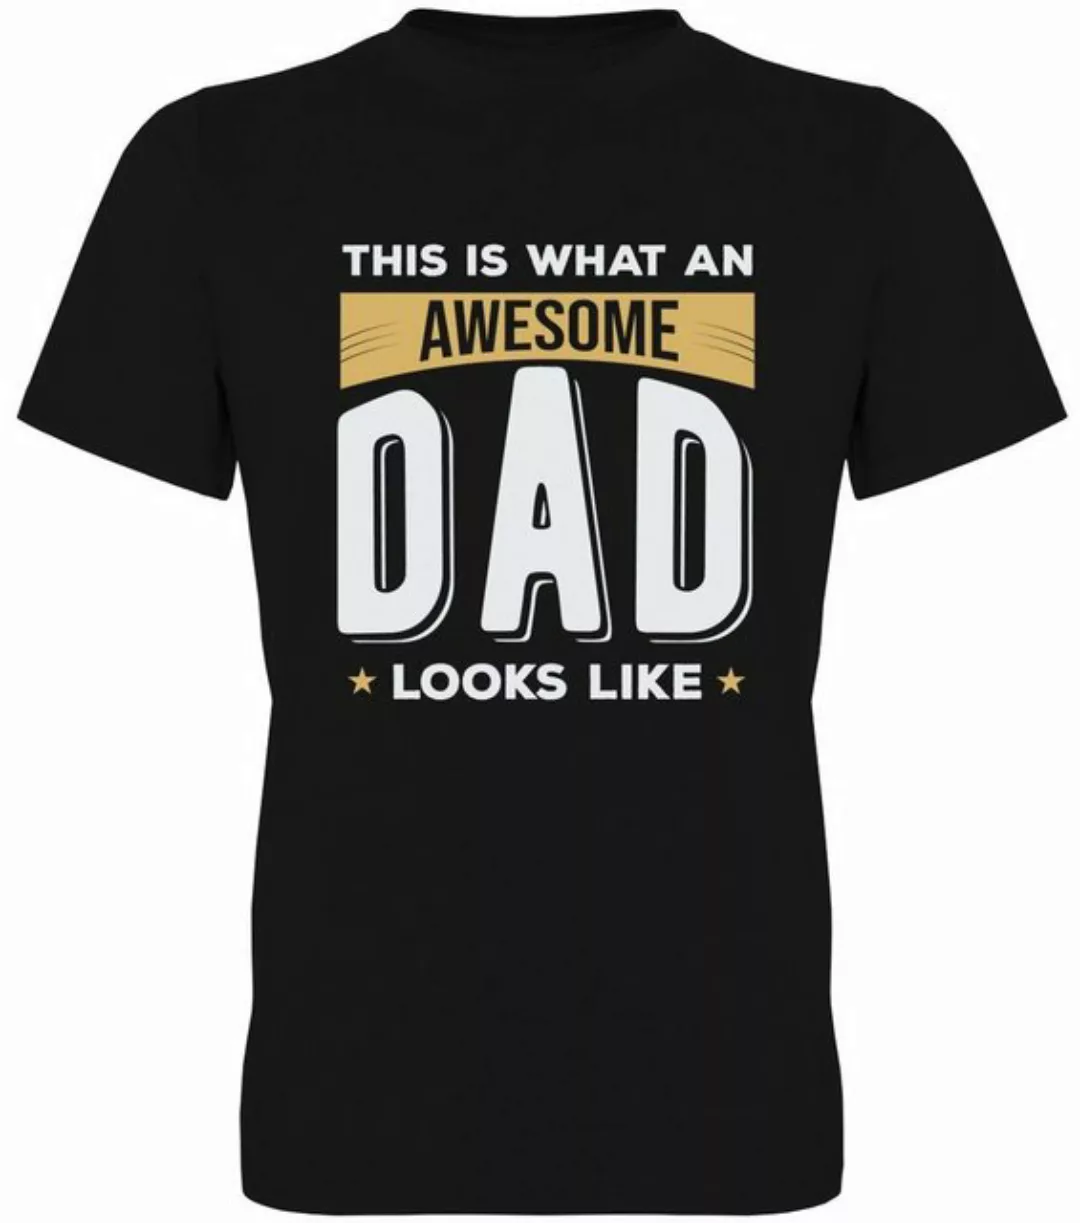 G-graphics T-Shirt This is what an awesome Dad looks like Herren T-Shirt, m günstig online kaufen